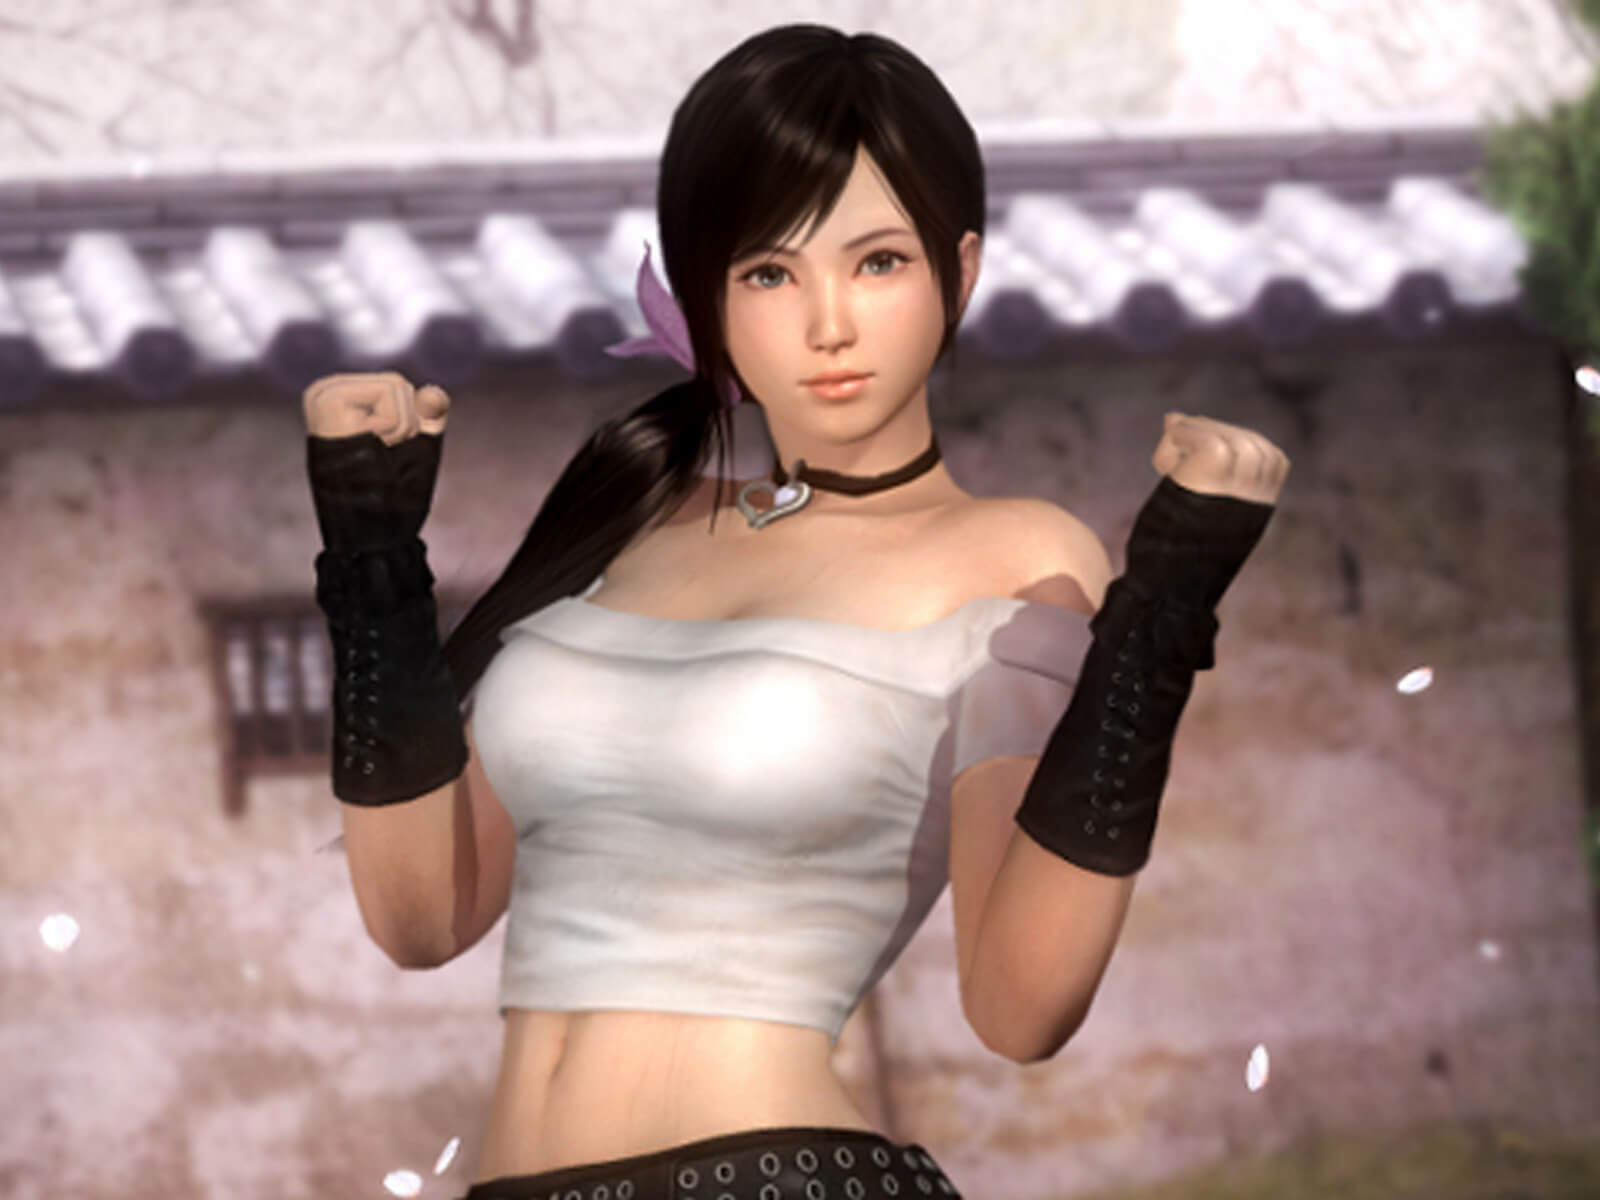 Kokoro from the Dead or Alive franchise stands in a courtyard in a white tube top